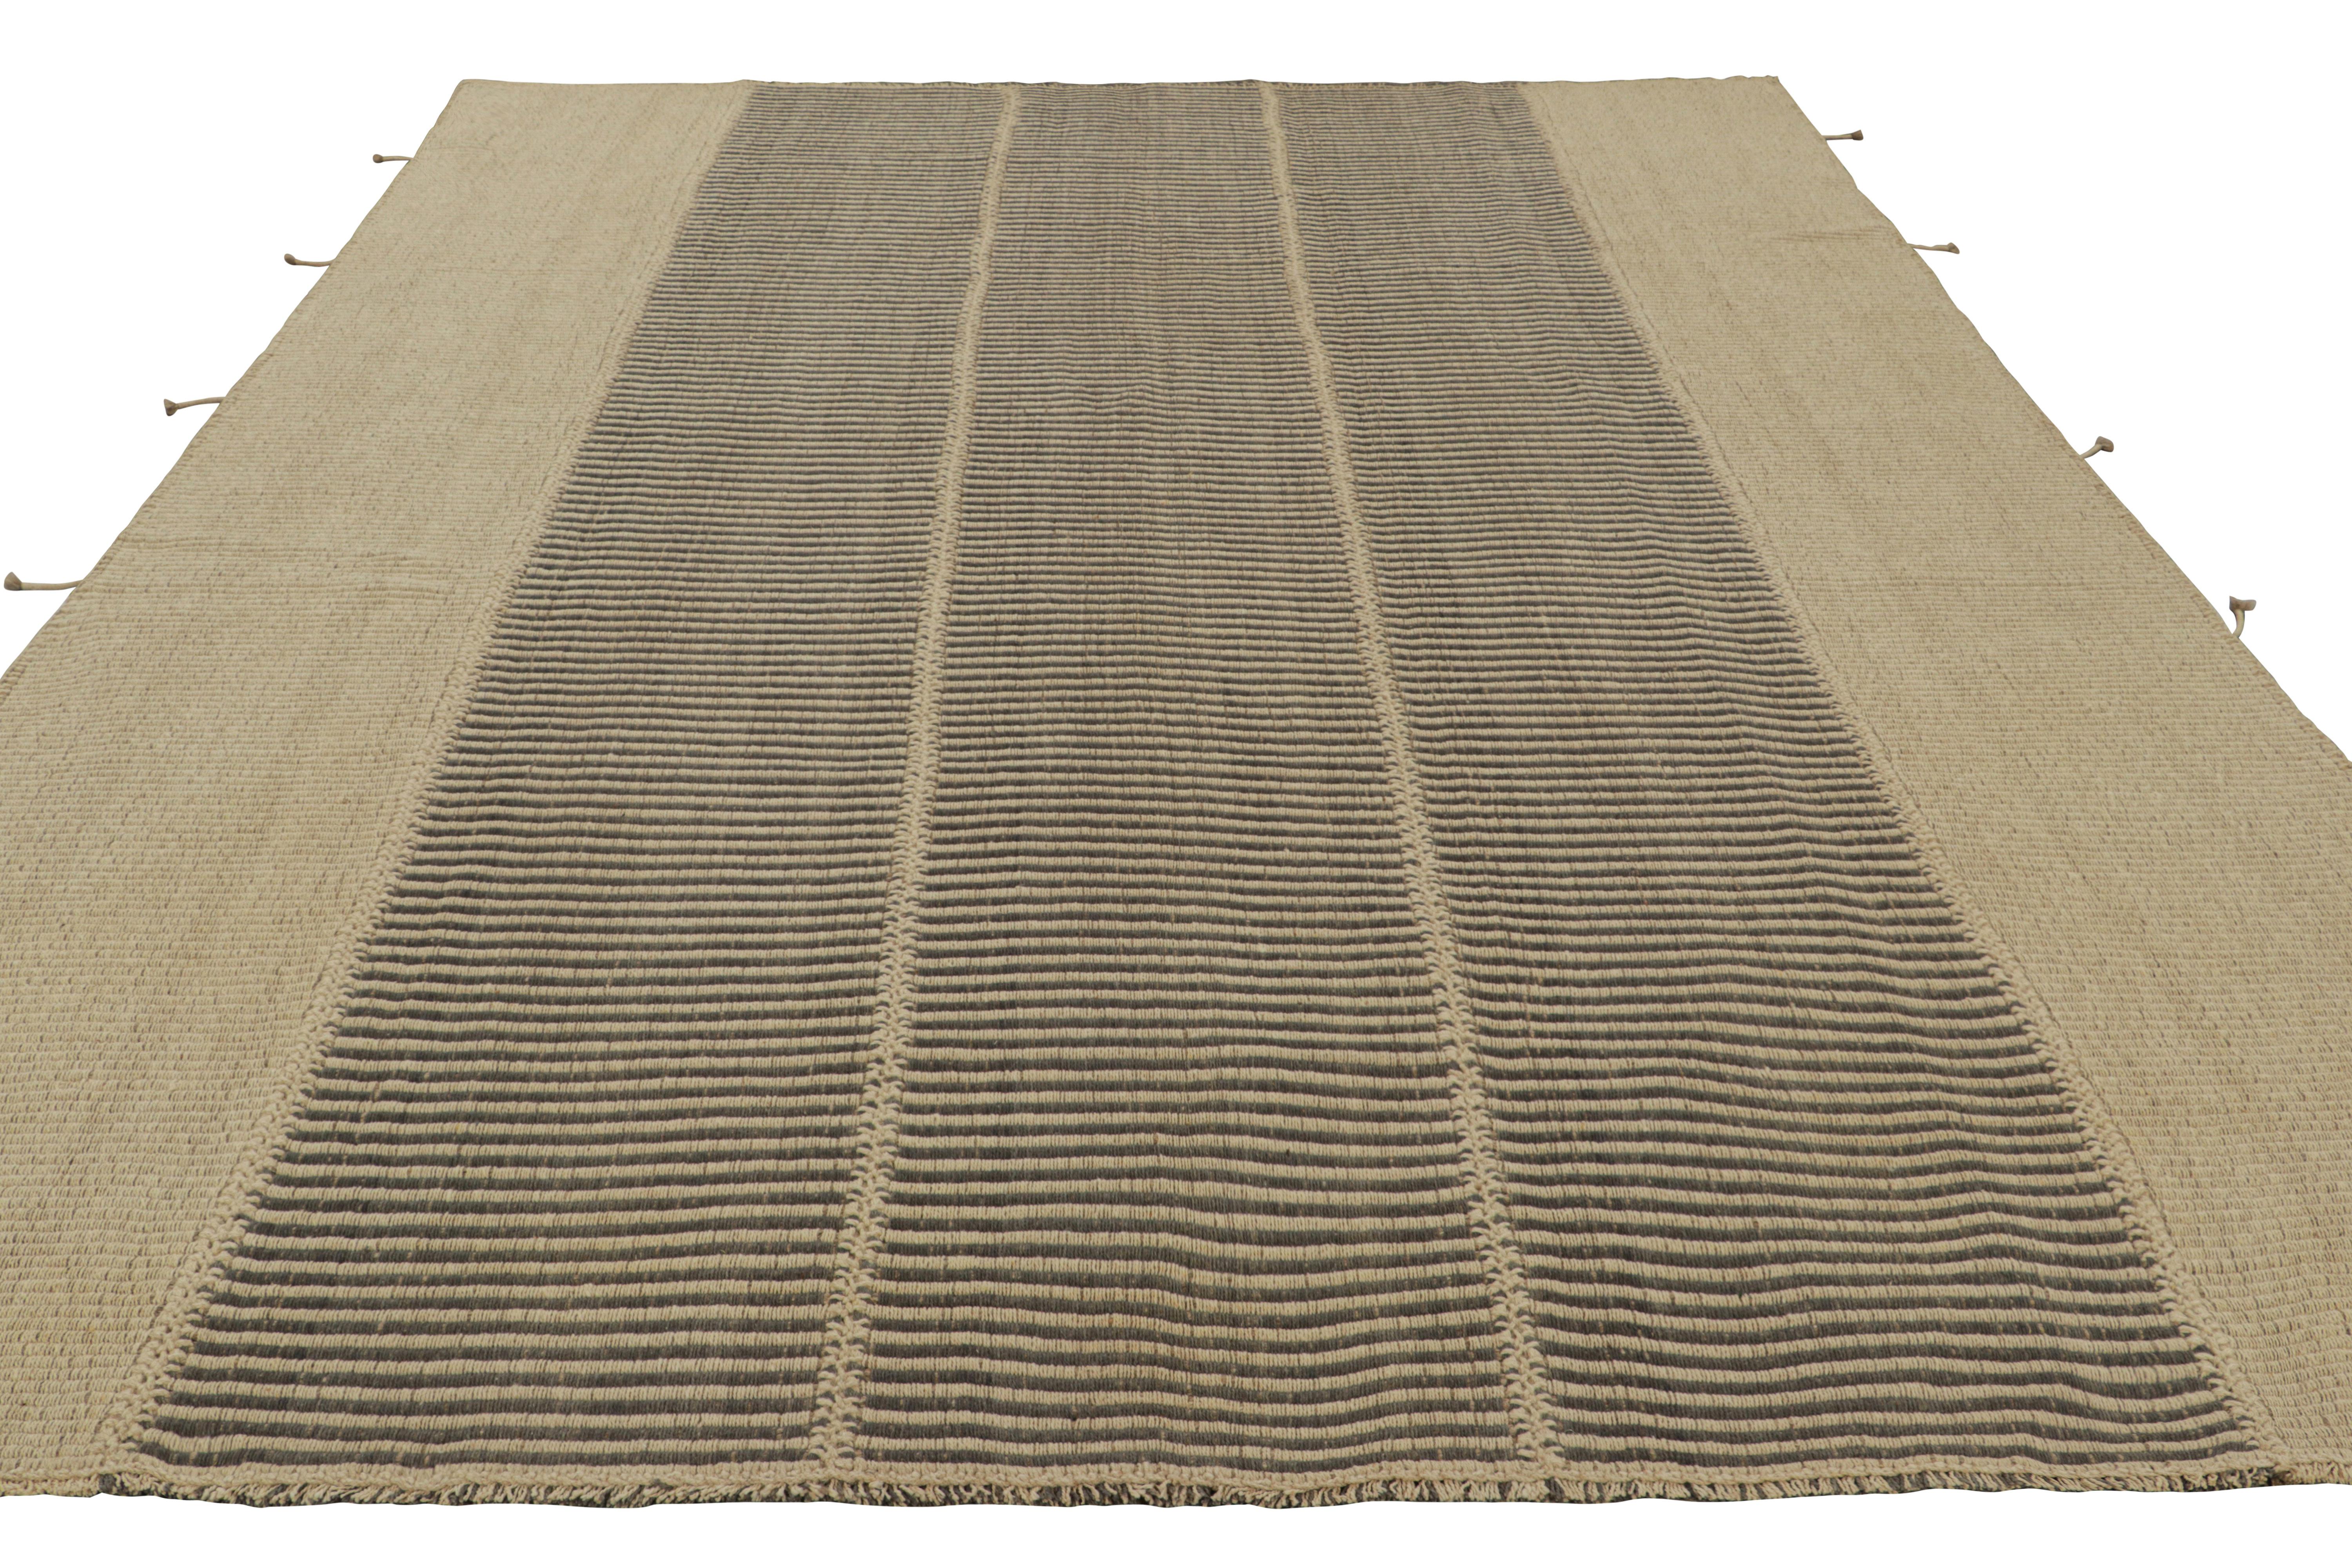 Hand-Woven Rug & Kilim’s Contemporary Kilim in Beige and Black Textural Stripes For Sale